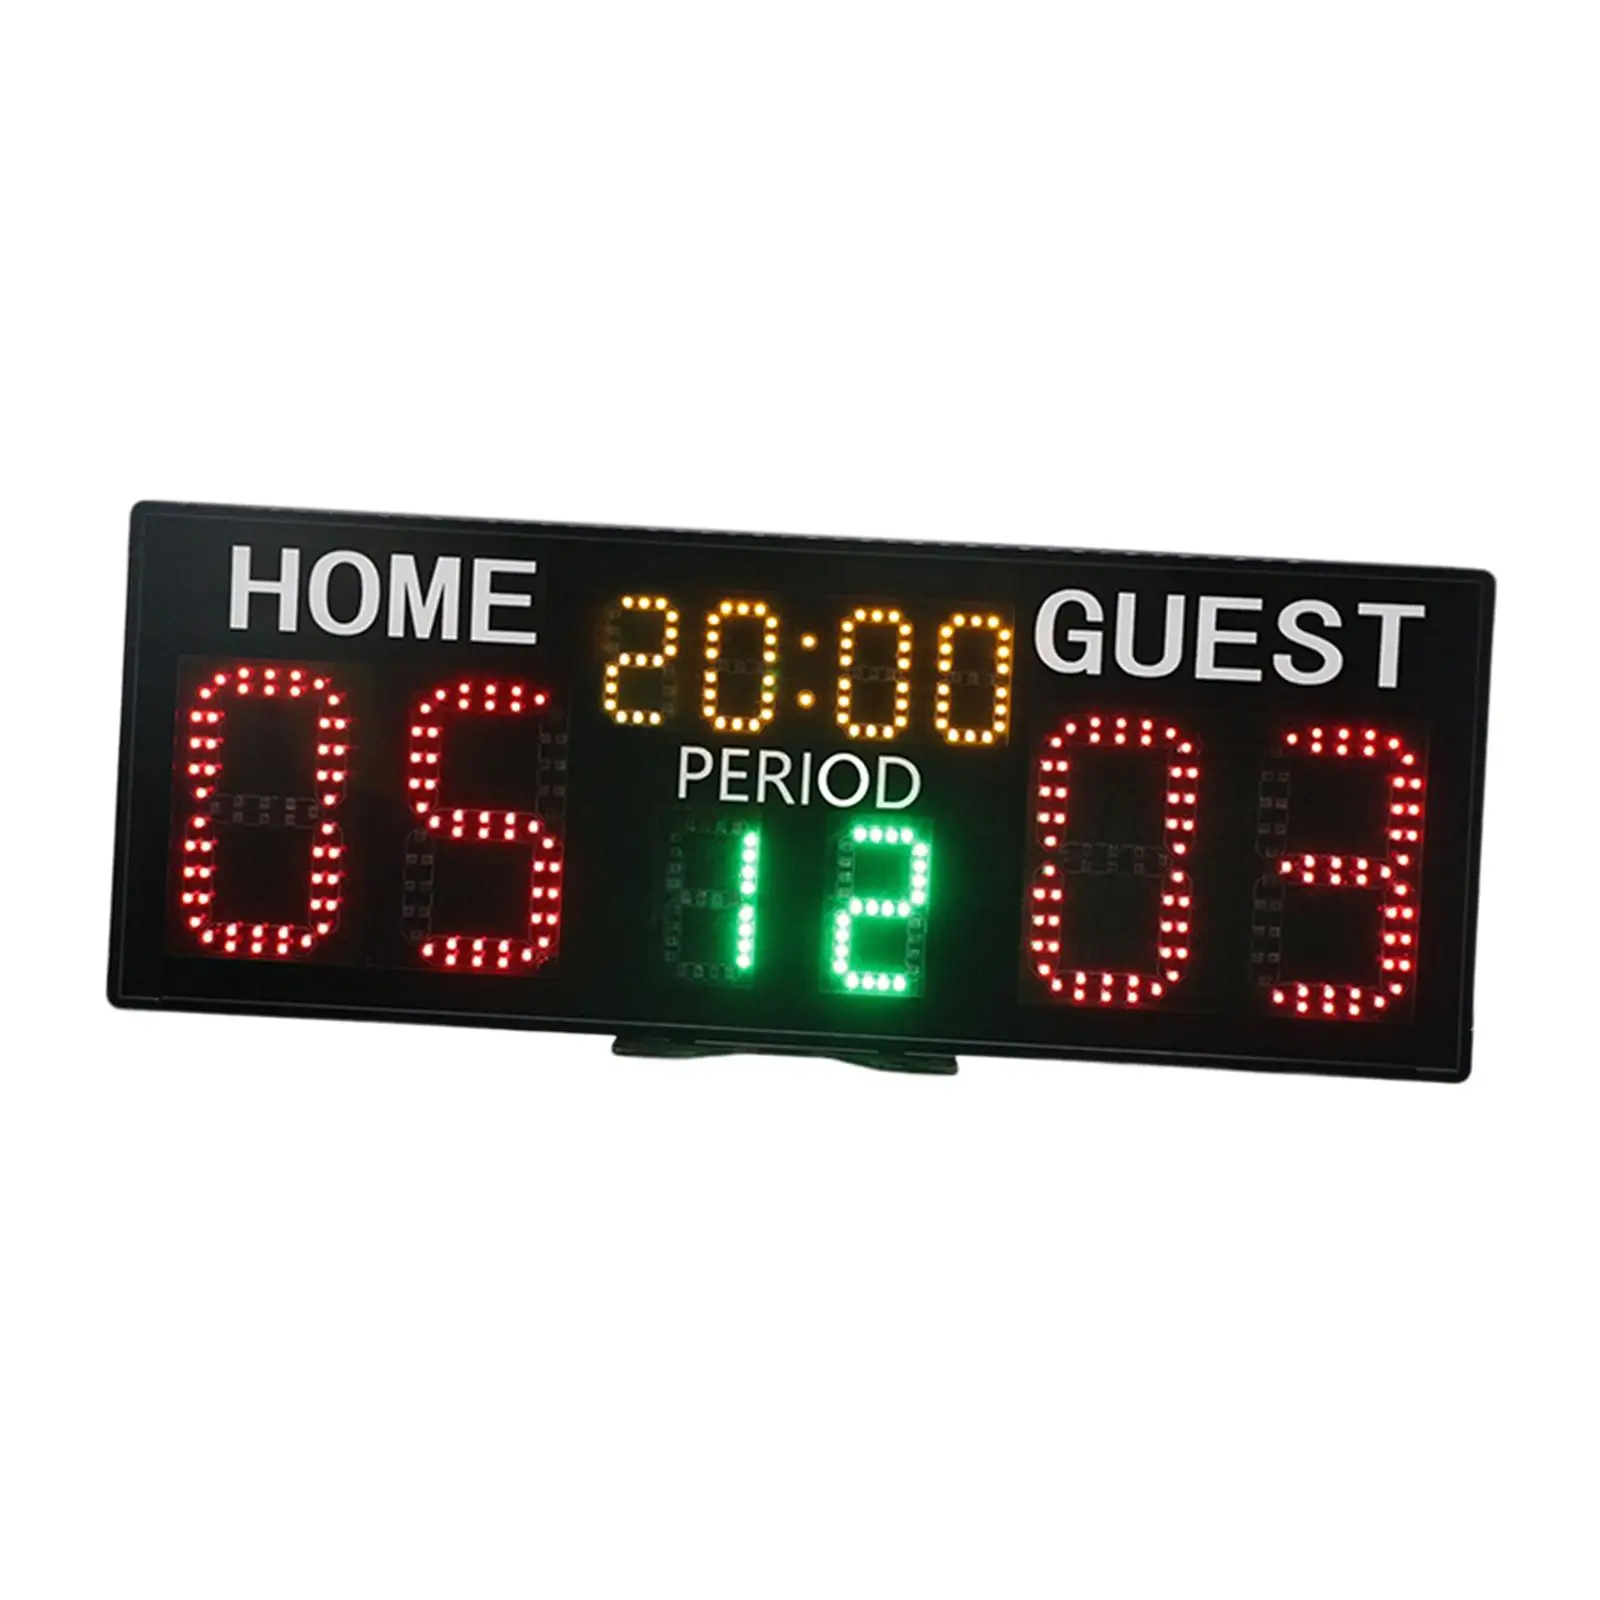 Tennis Score Keeper Tabletop Home Guest with Remote Portable Score Clock for Basketball Volleyball Football Table Tennis Outdoor